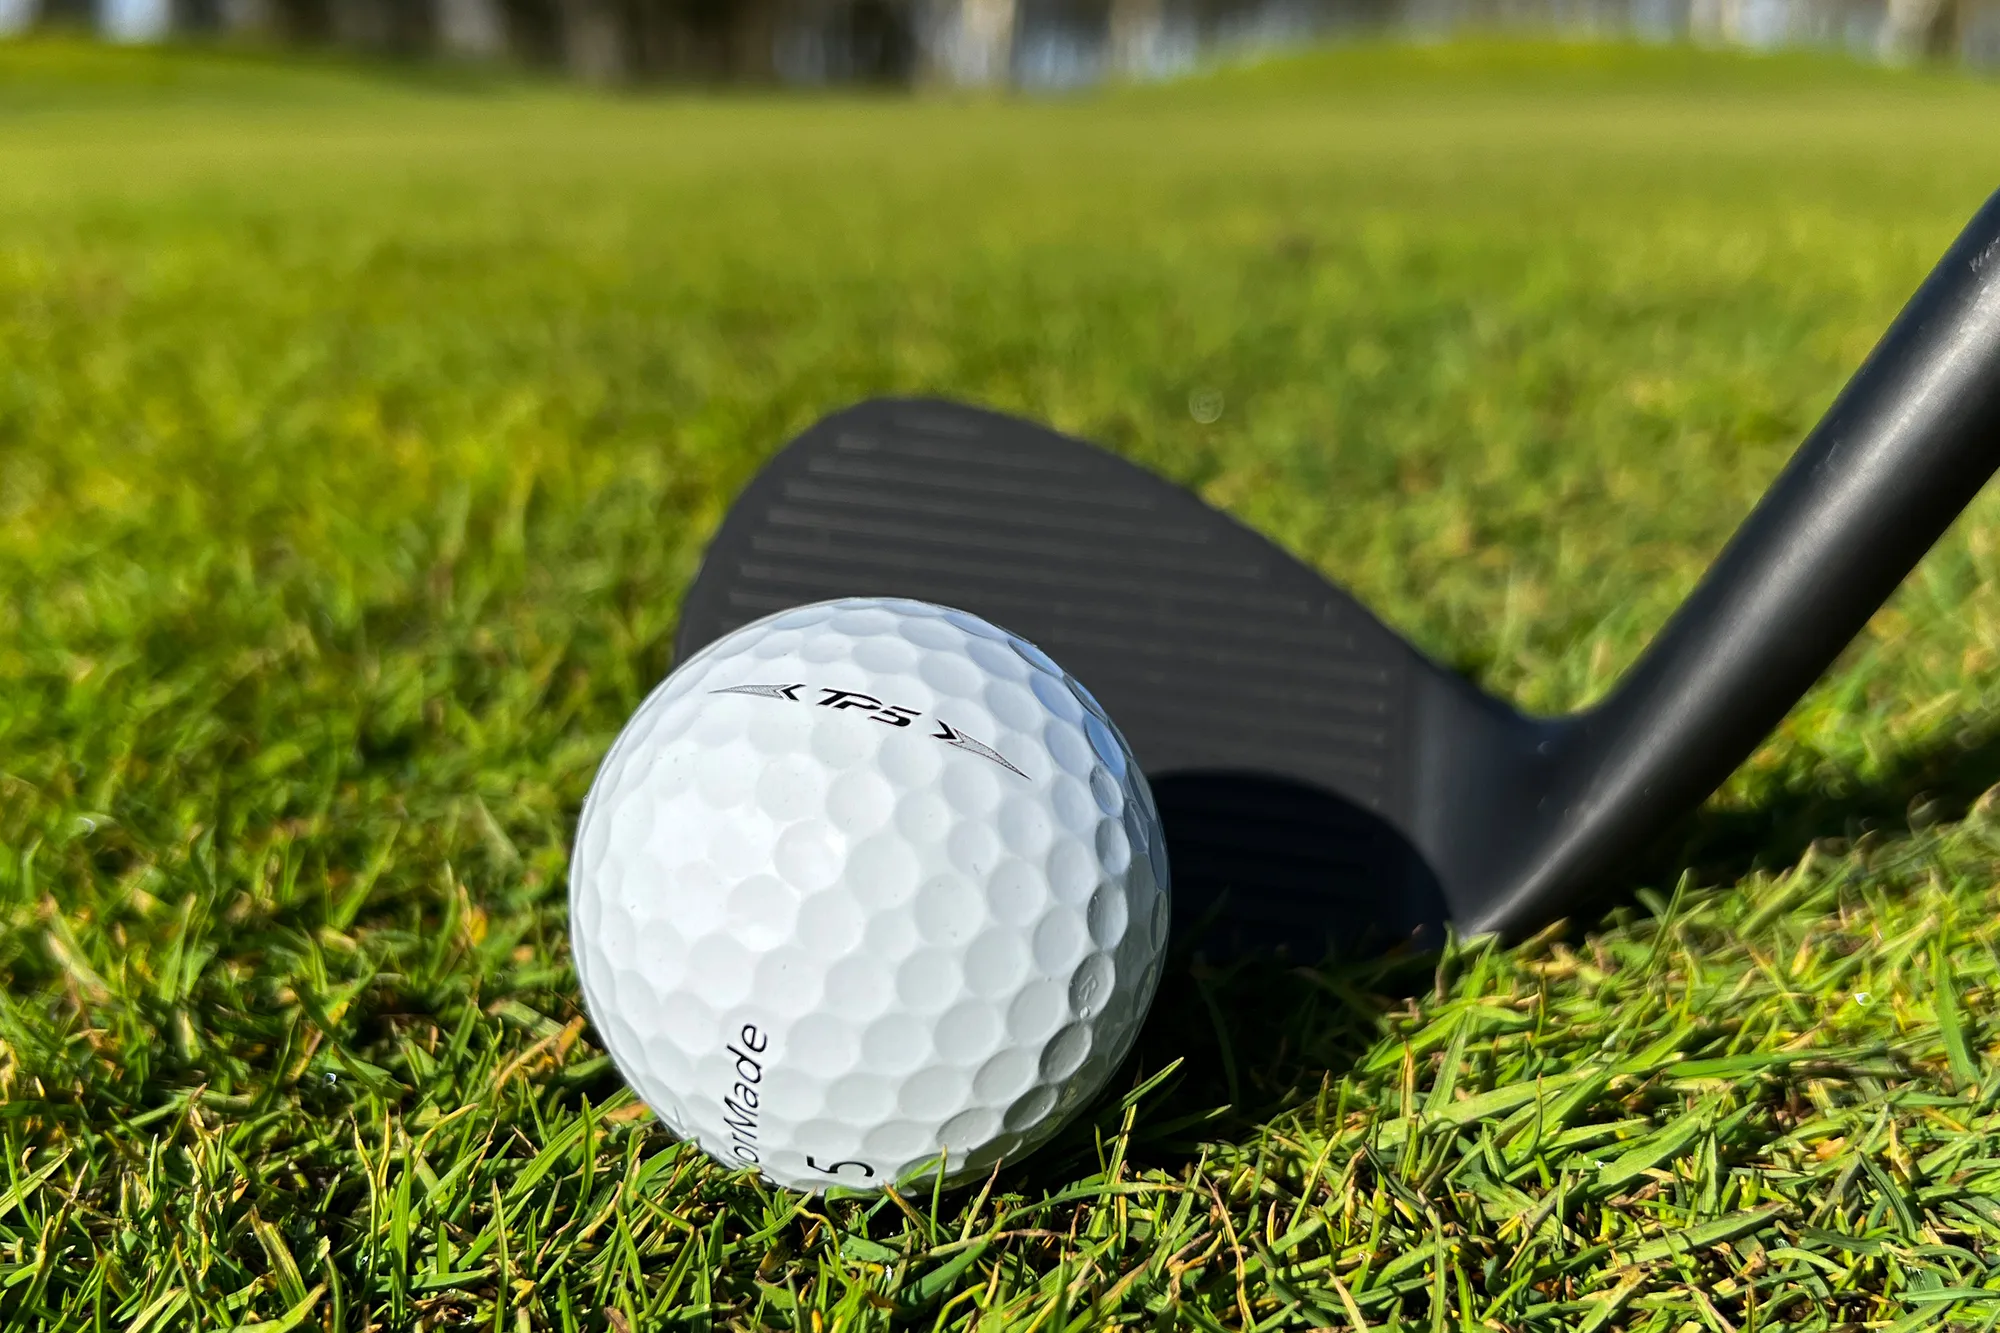 TaylorMade TP5 golf ball review